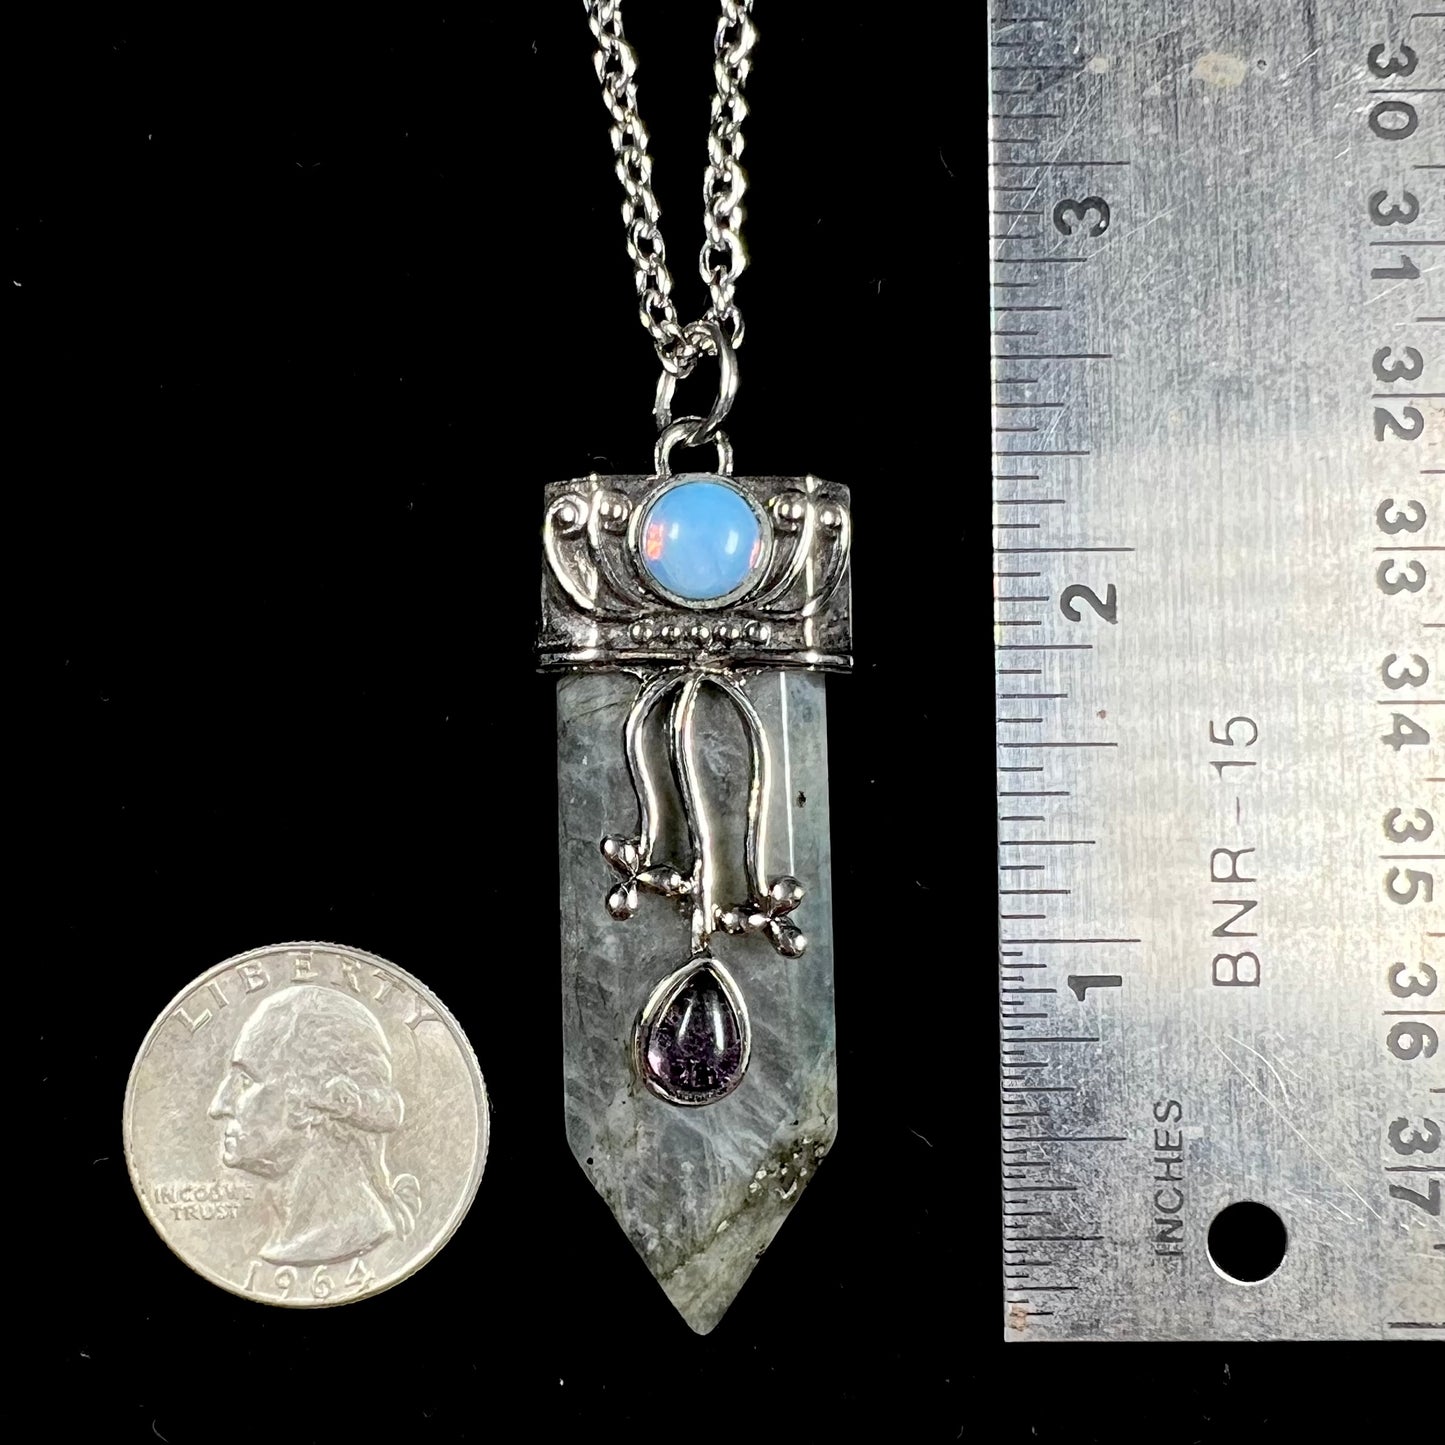 A stainless steal necklace set with a crystal shaped labradorite stone, purple glass, and an opalite accent.